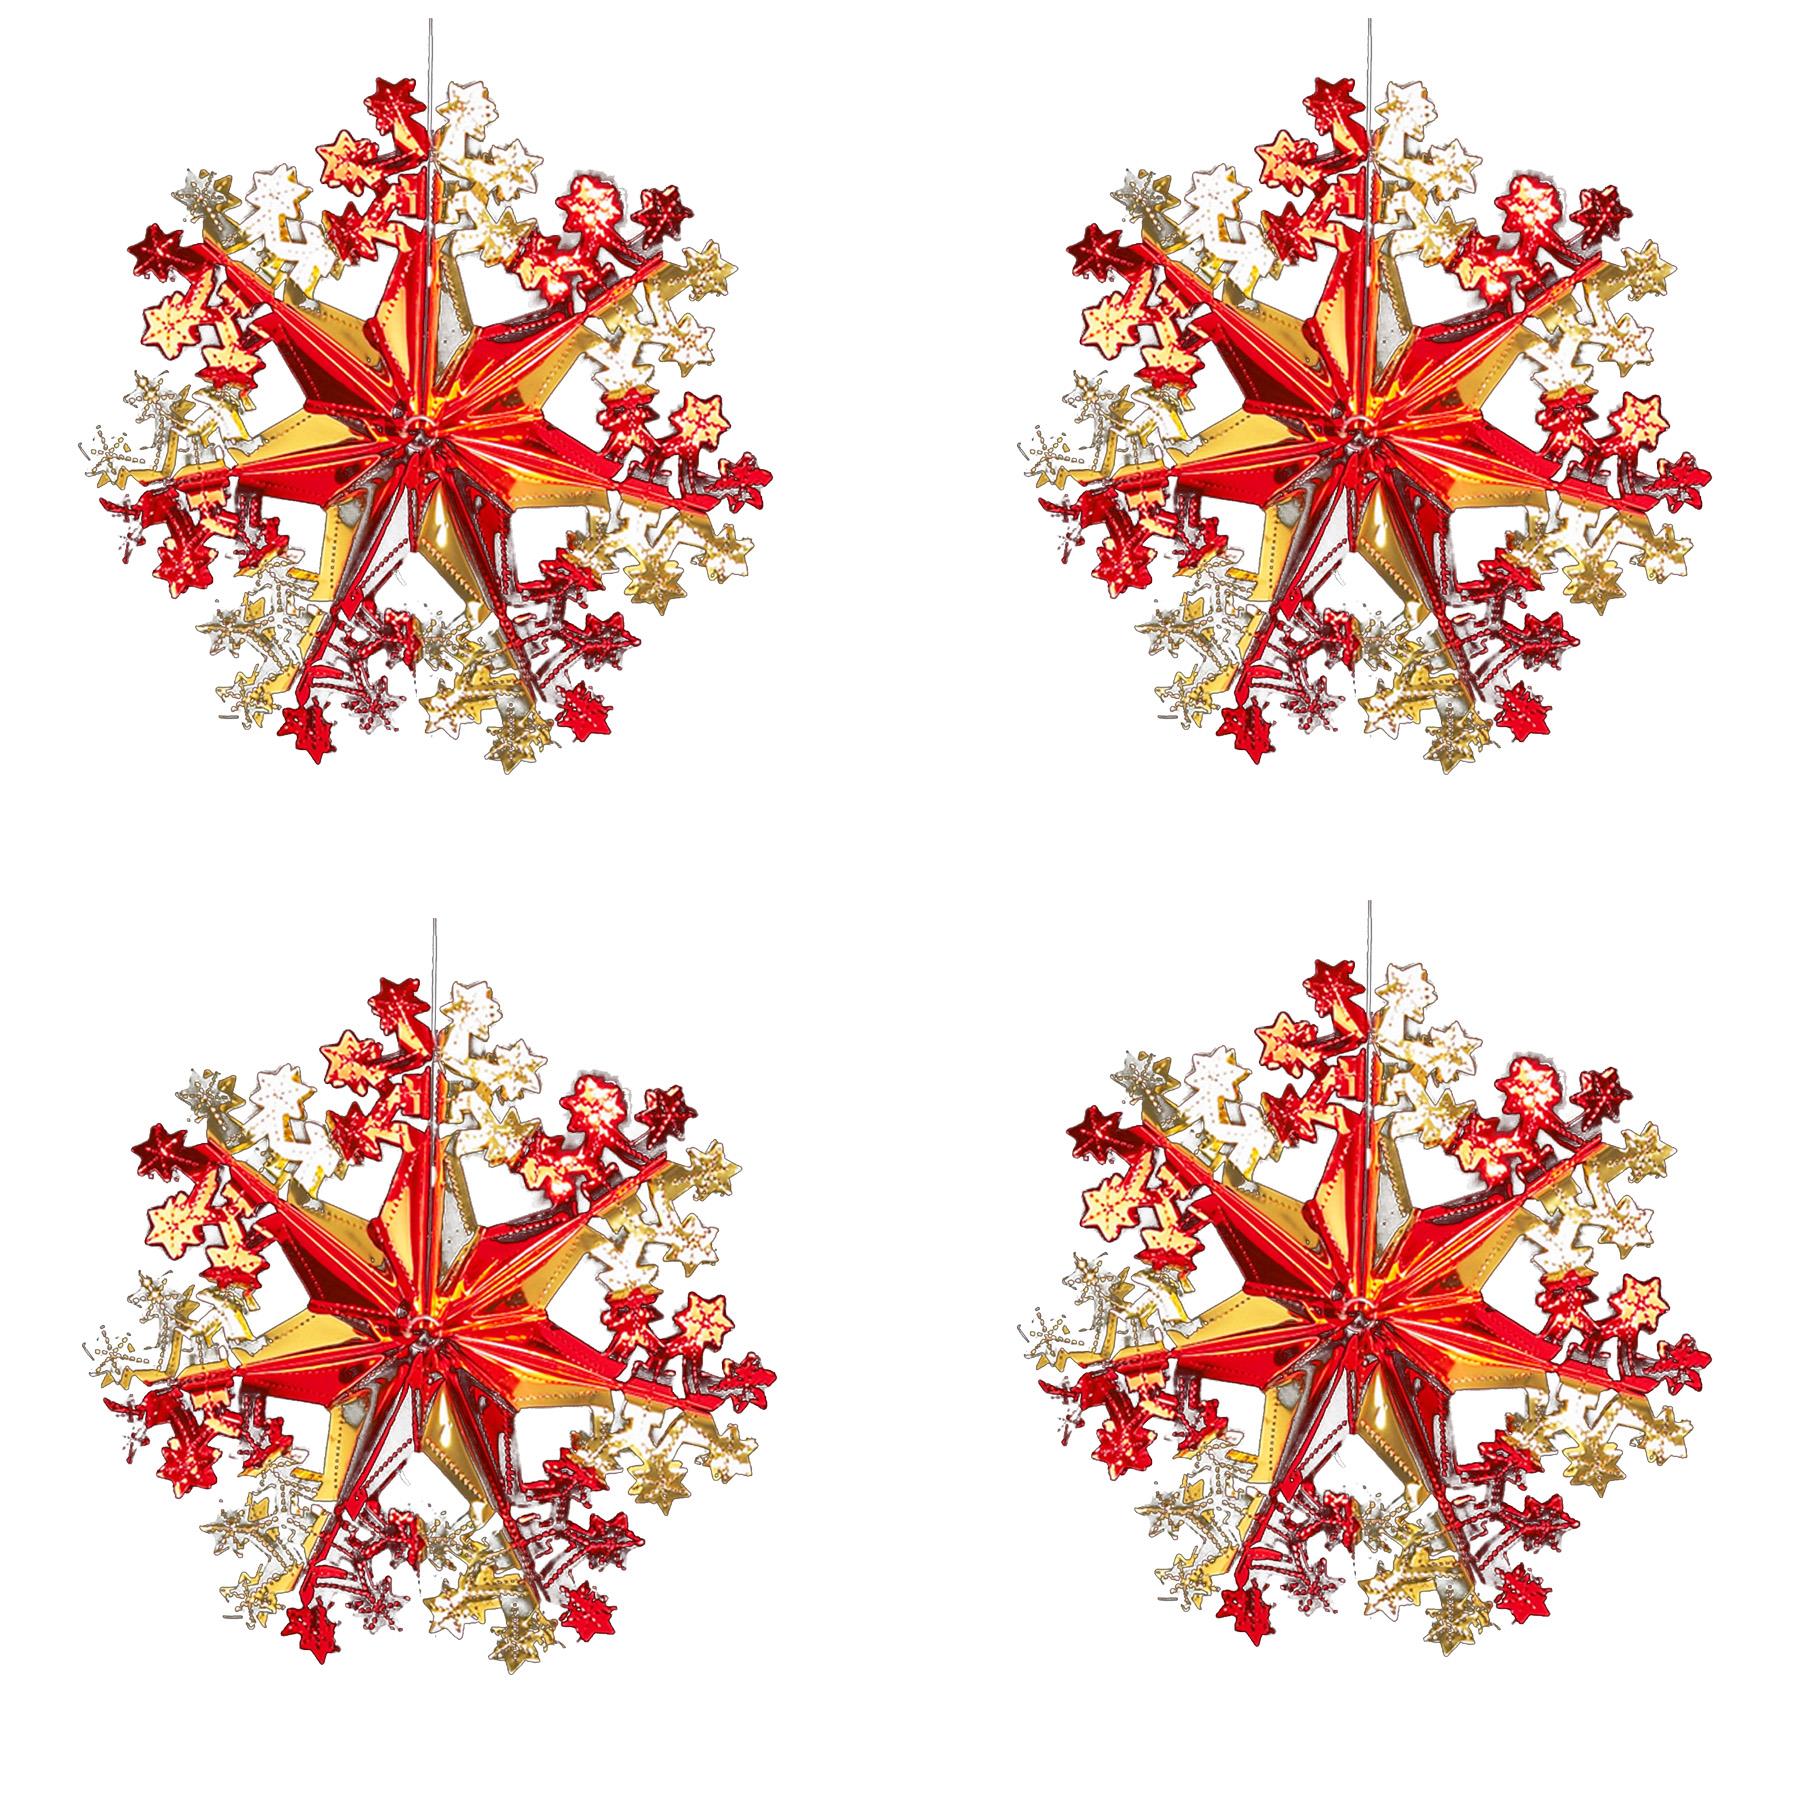 Red / Gold Christmas 2 Tone Foil Ceiling Decorations - Set 4 40cm Star Snowflakes